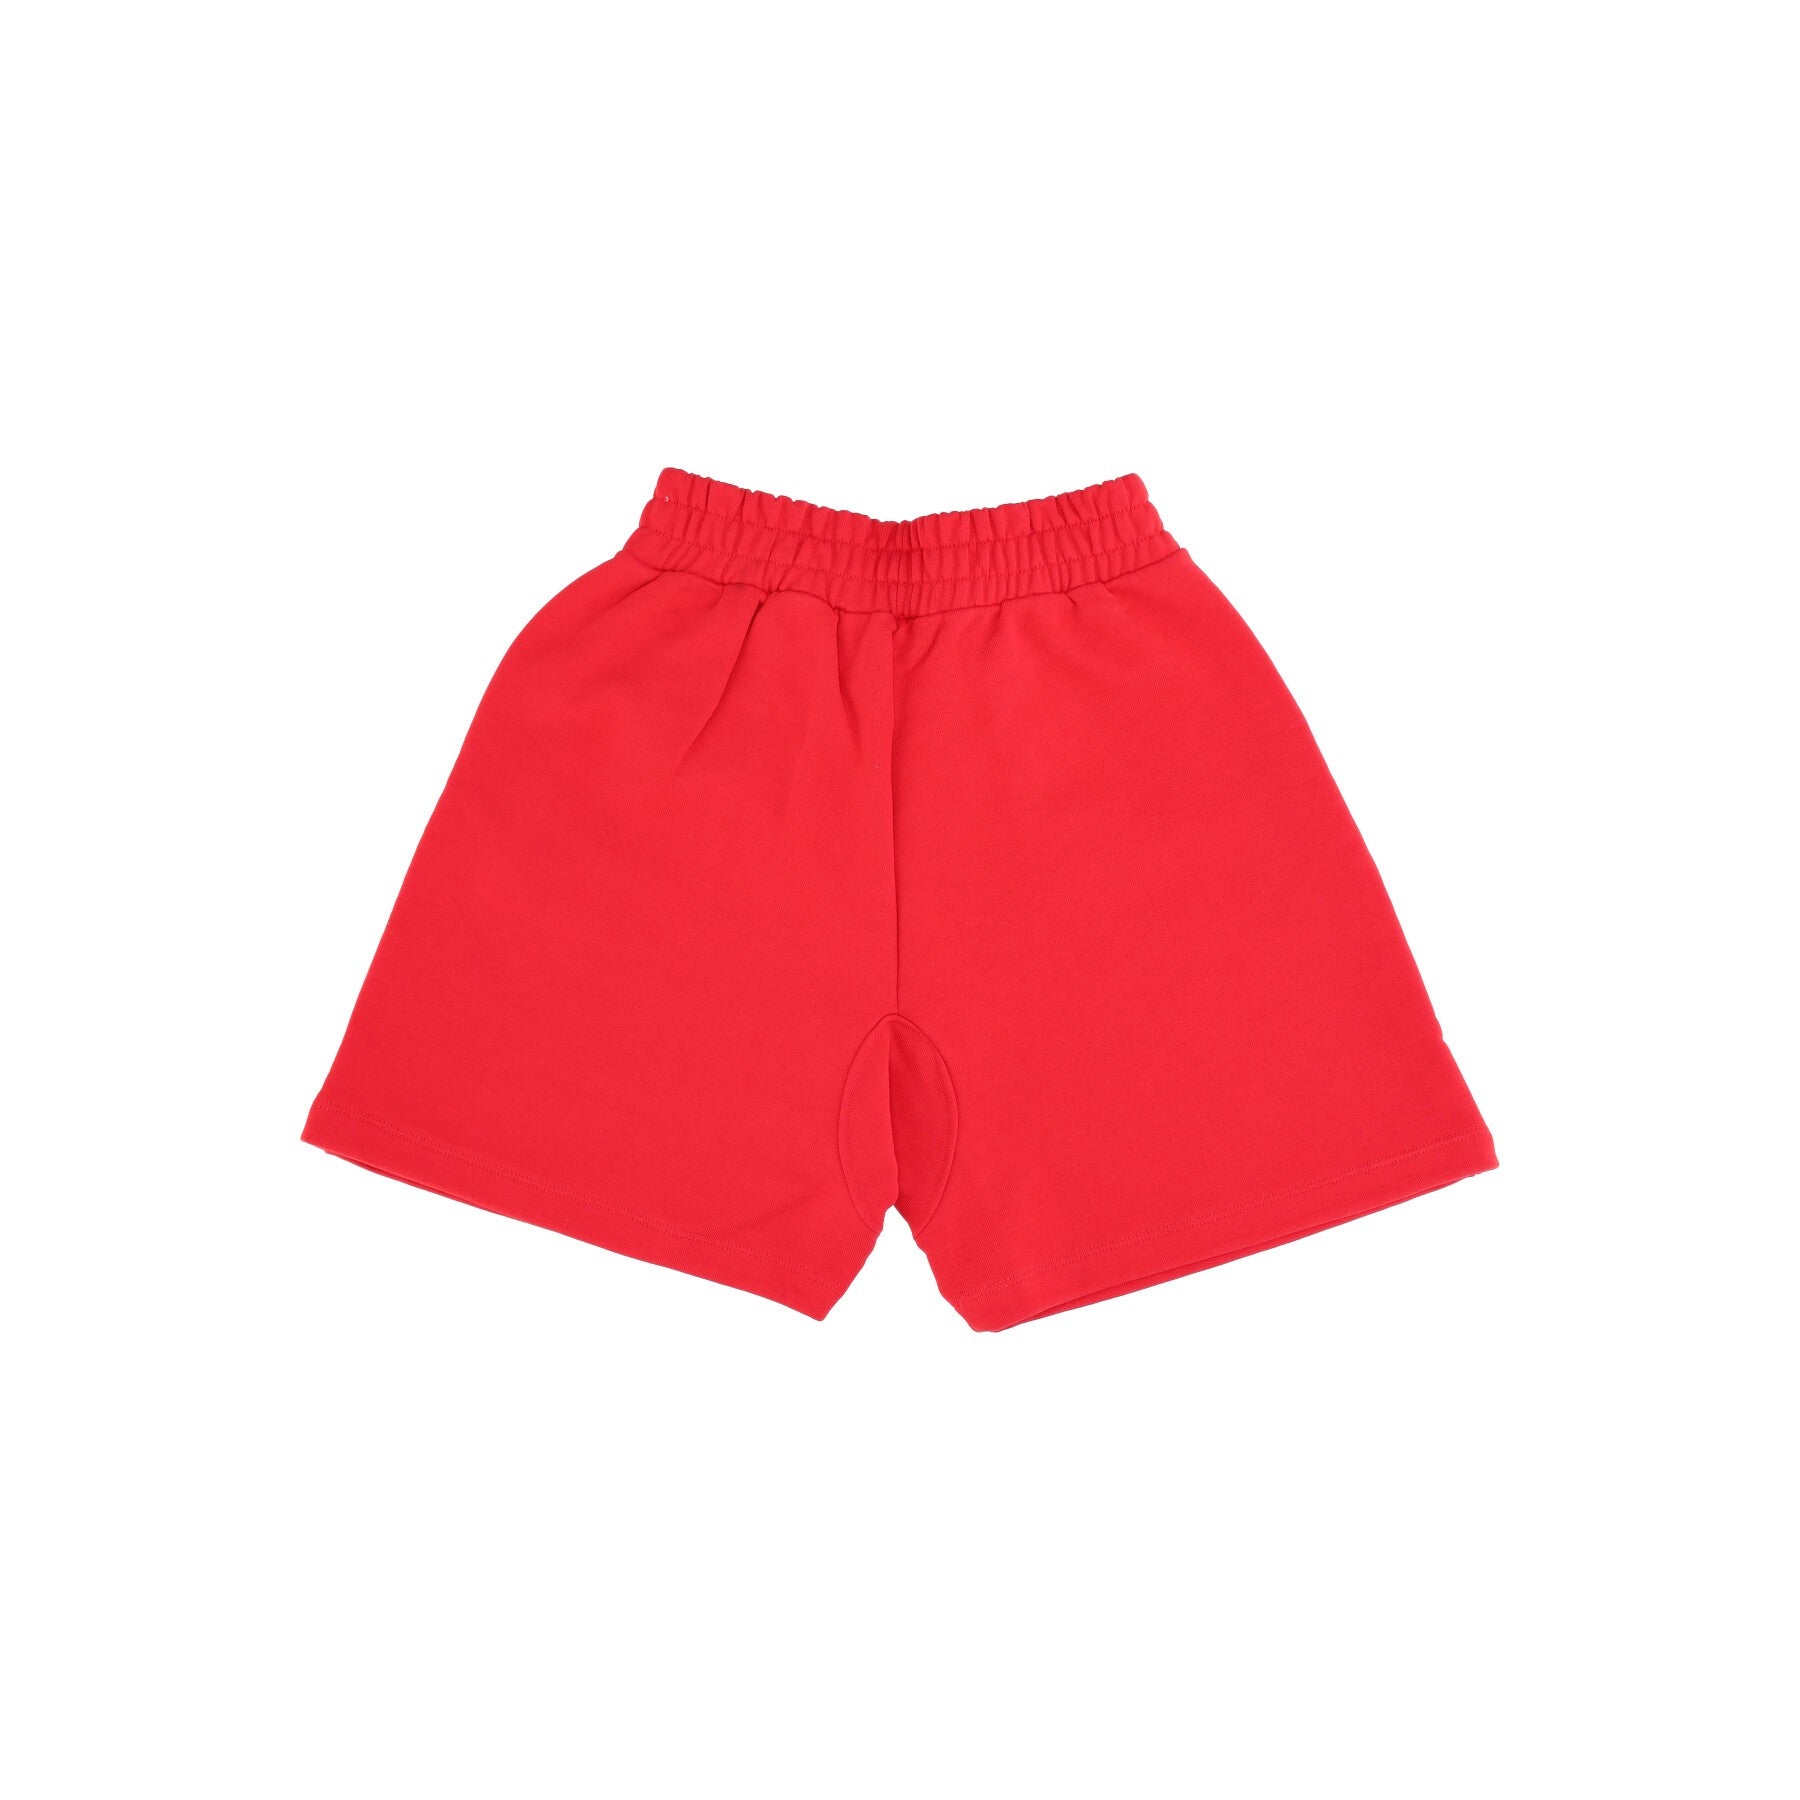 Men's Tracksuit Shorts Embroidered Logo Shorts Red